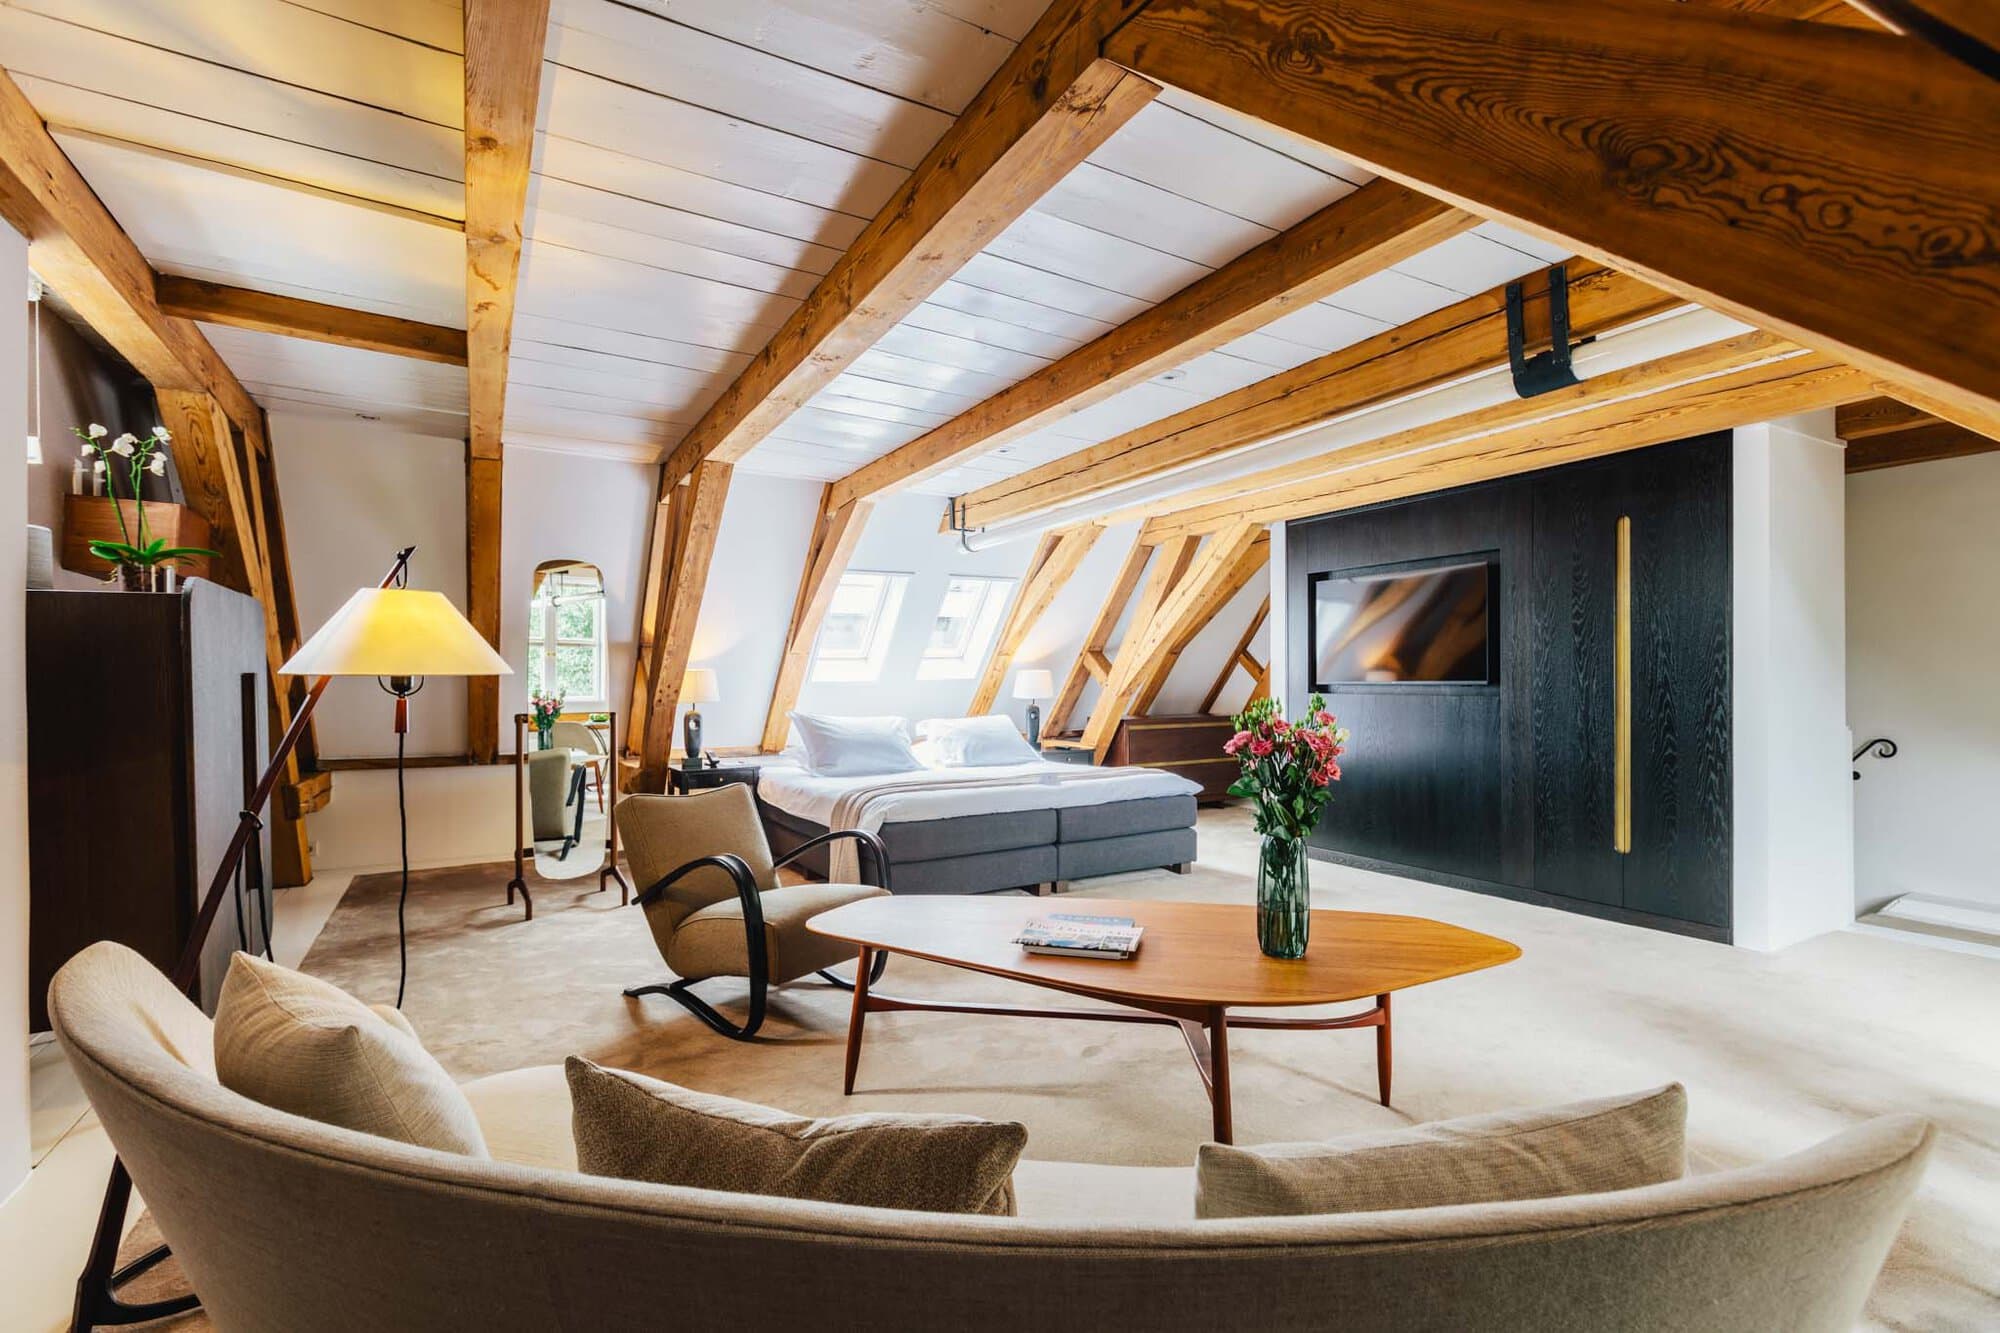 A loft style room at botique hotel The Dylan Amsterdam, leading hotels of the world.